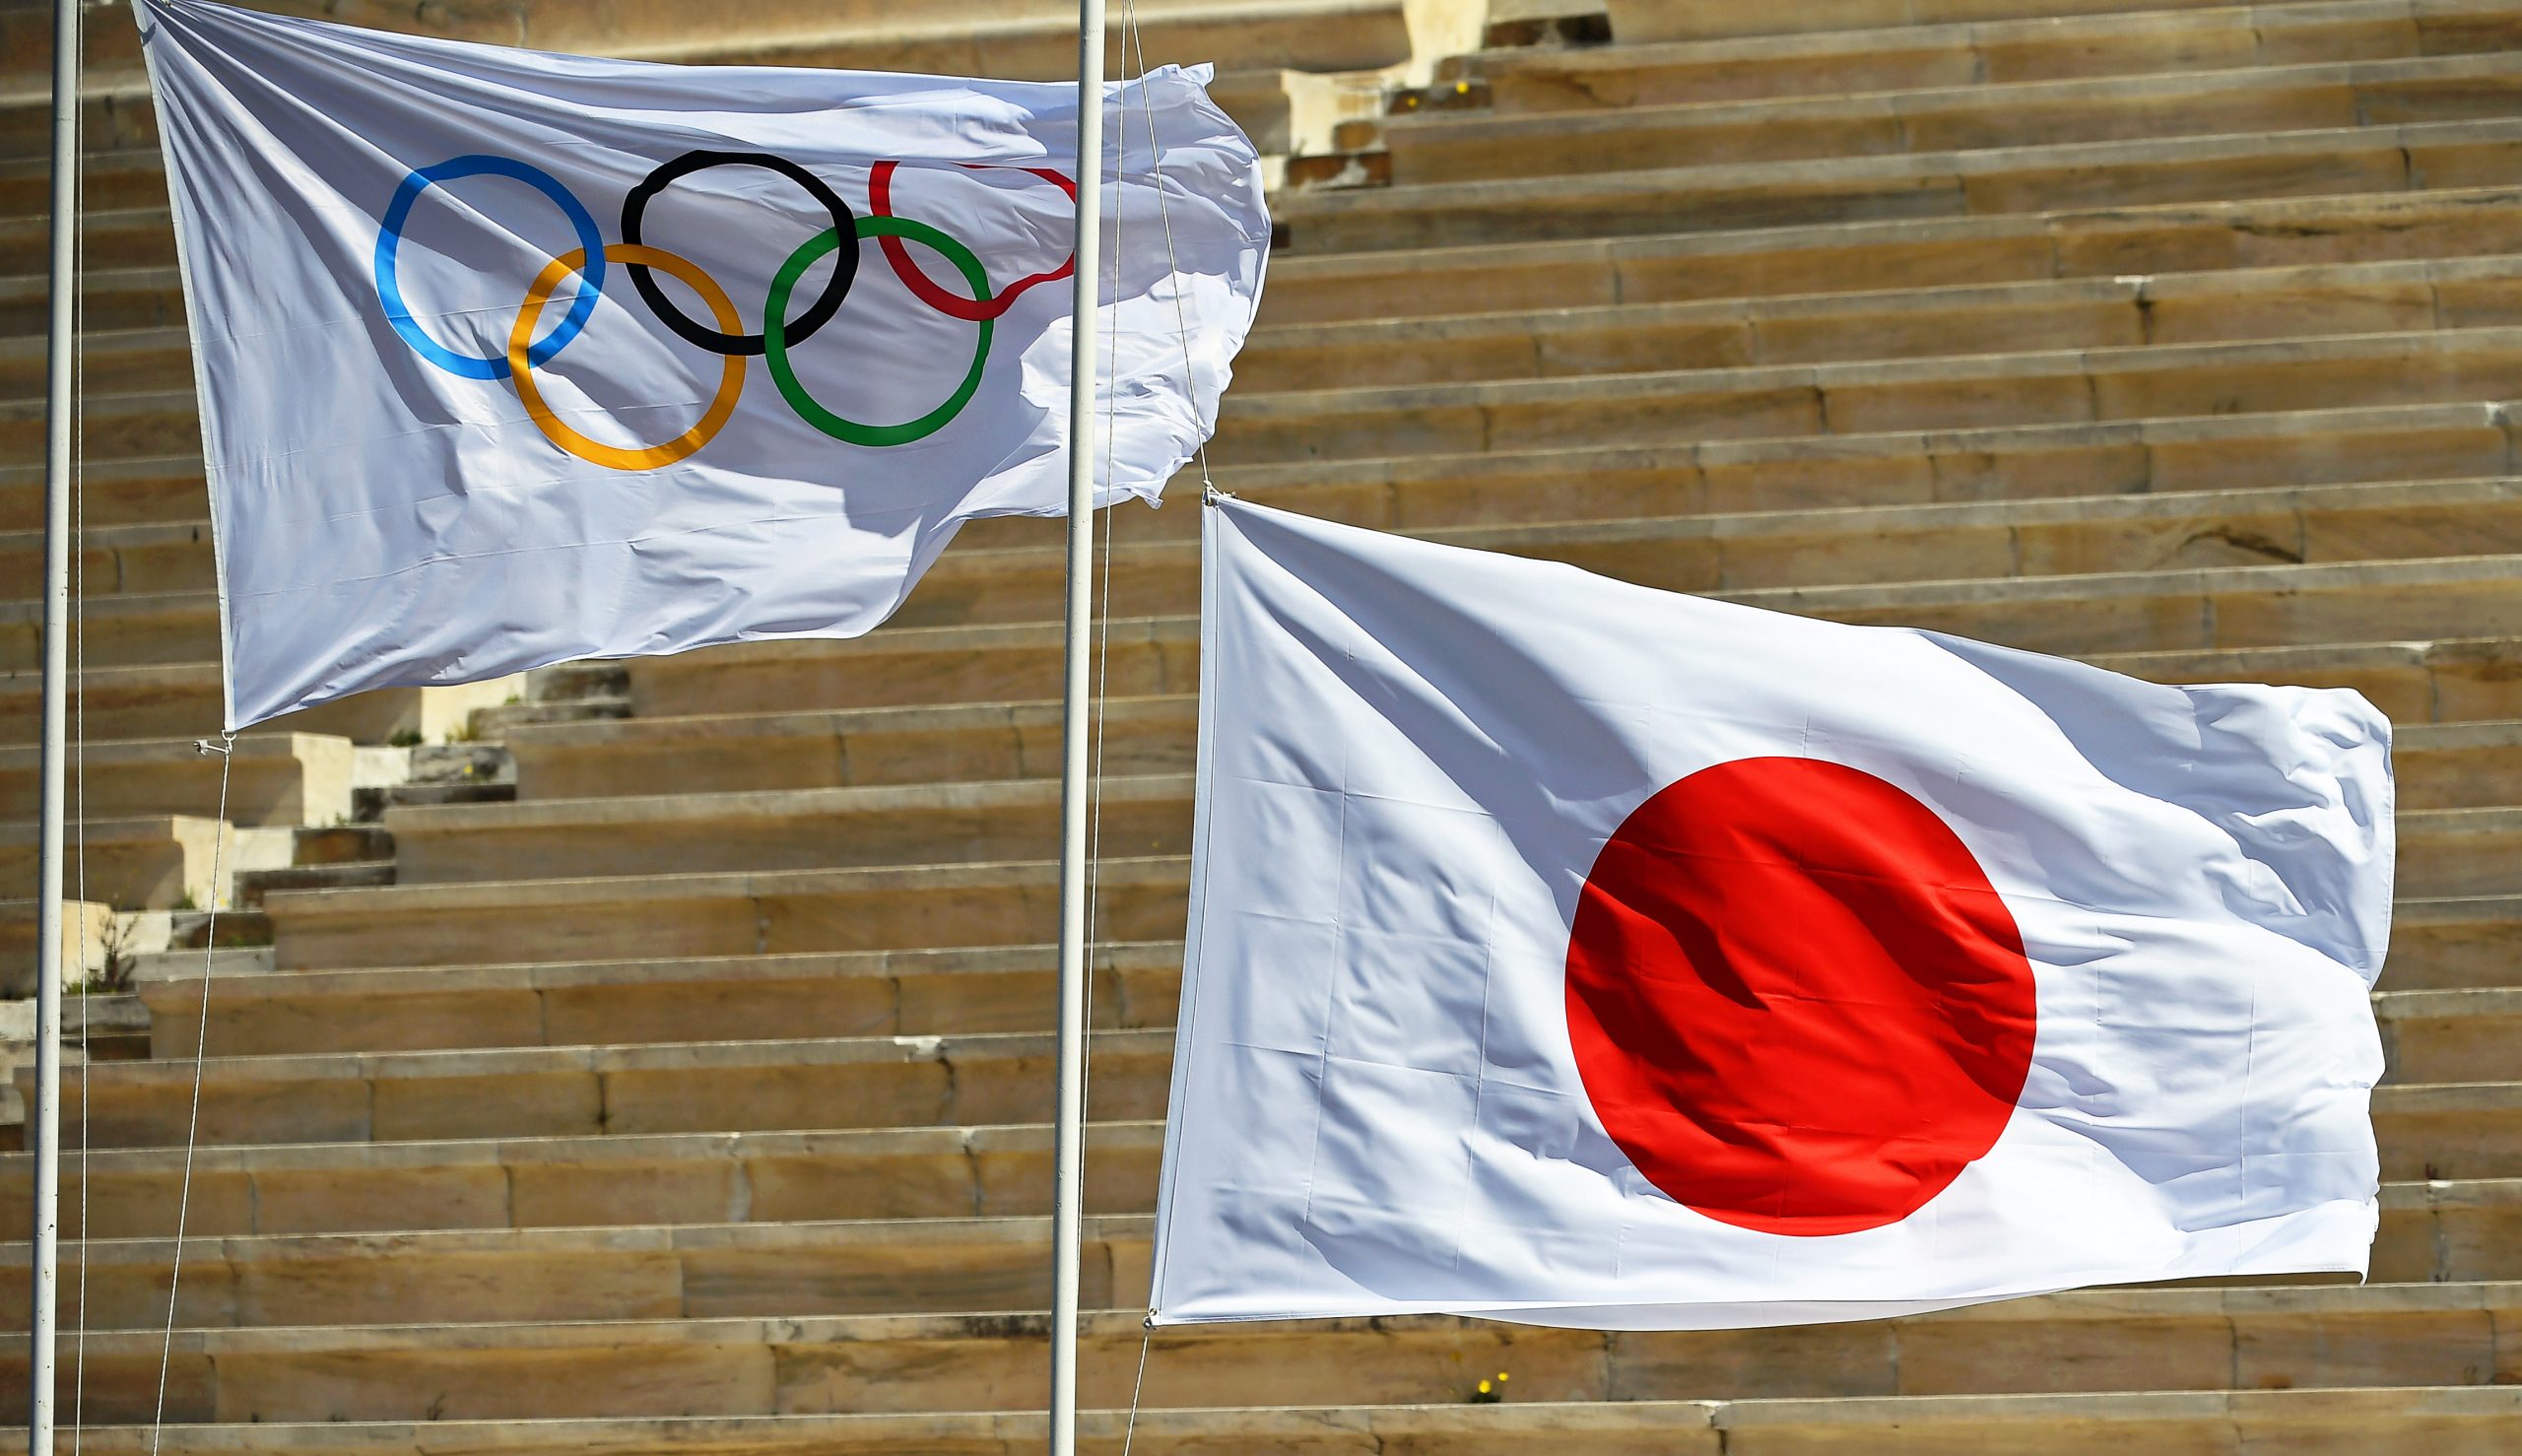 epa08306026 The national flag of Japan (R) is hoisted next to the Olympic flag (L) during the Olympic Flame handover ceremony for the Tokyo 2020 Summer Olympic Games at the Panathenaic Stadium in Athens, Greece, 19 March 2020.  EPA/ARIS MESSINIS / POOL